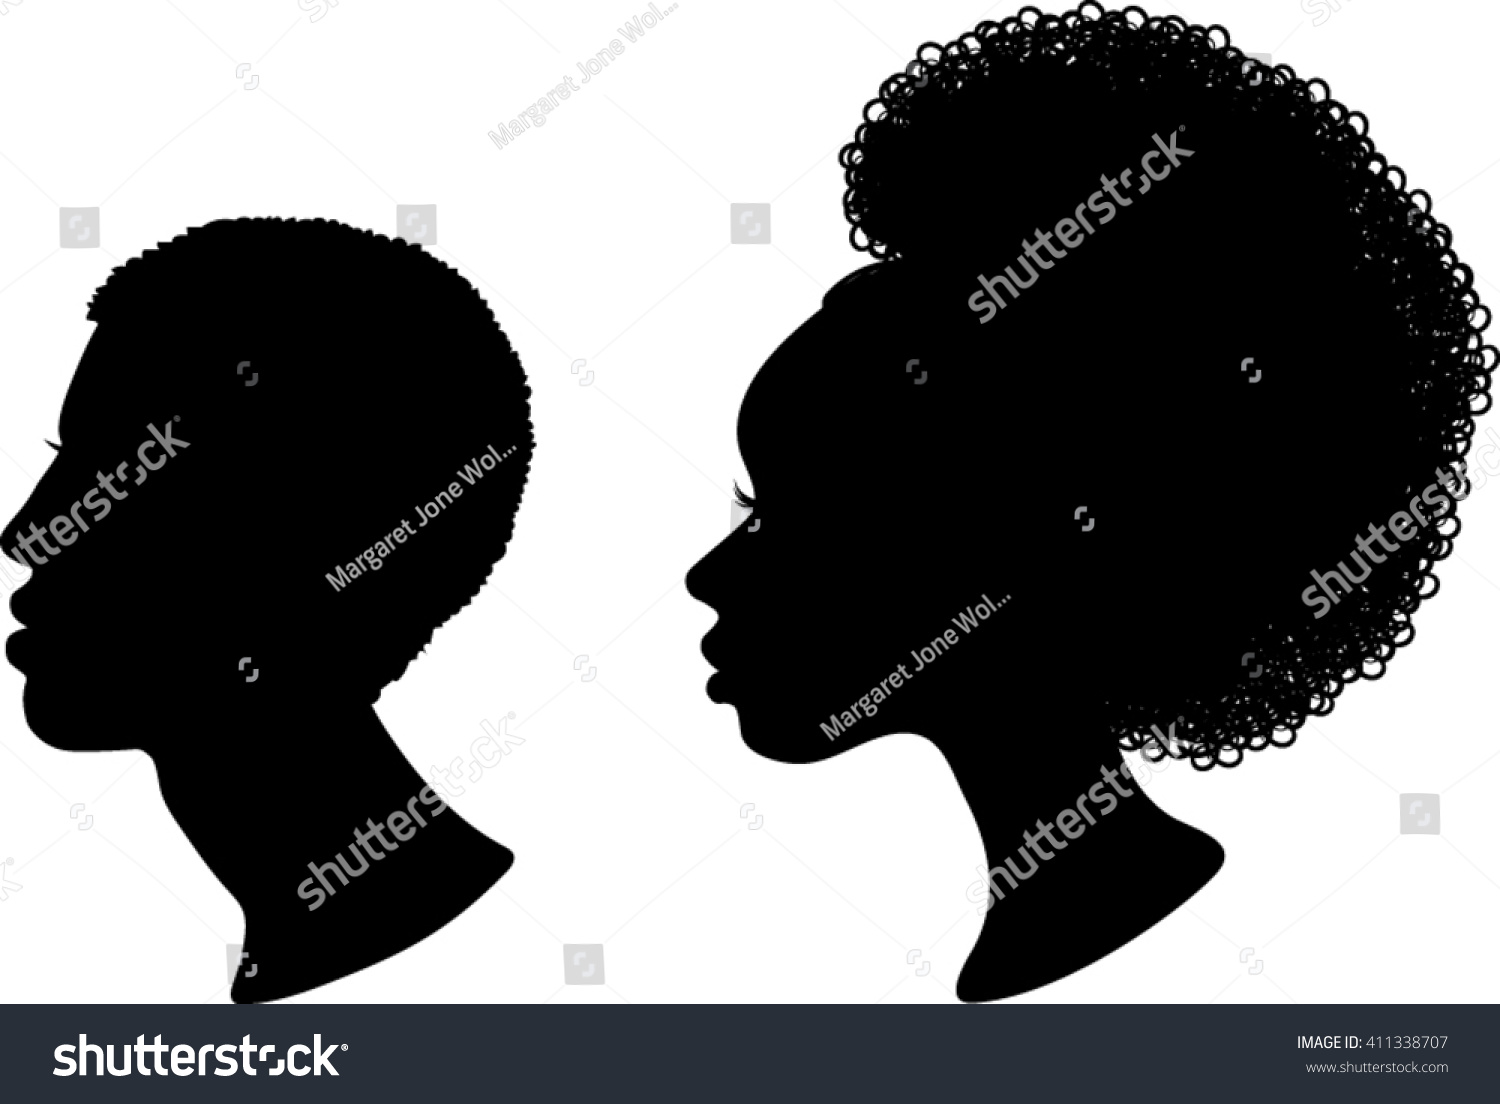 SVG of African Profile Silhouettes - Vector Illustration svg